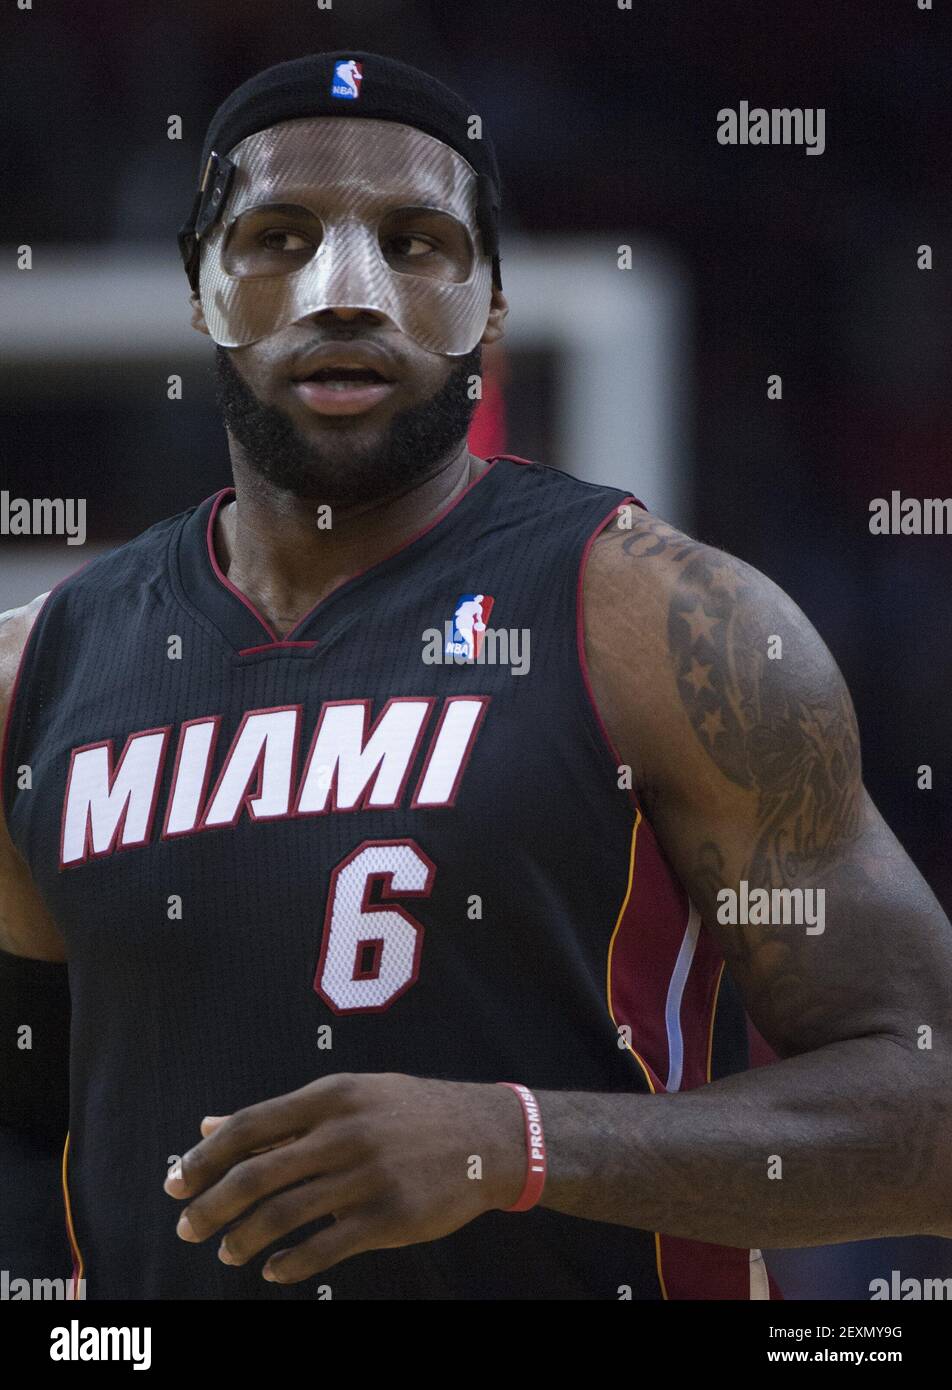 LeBron James (6) of the Miami Heat wears a protective face mask as his team  faces the Houston Rockets in the first half of their game on Tuesday, March  4, 2014, in